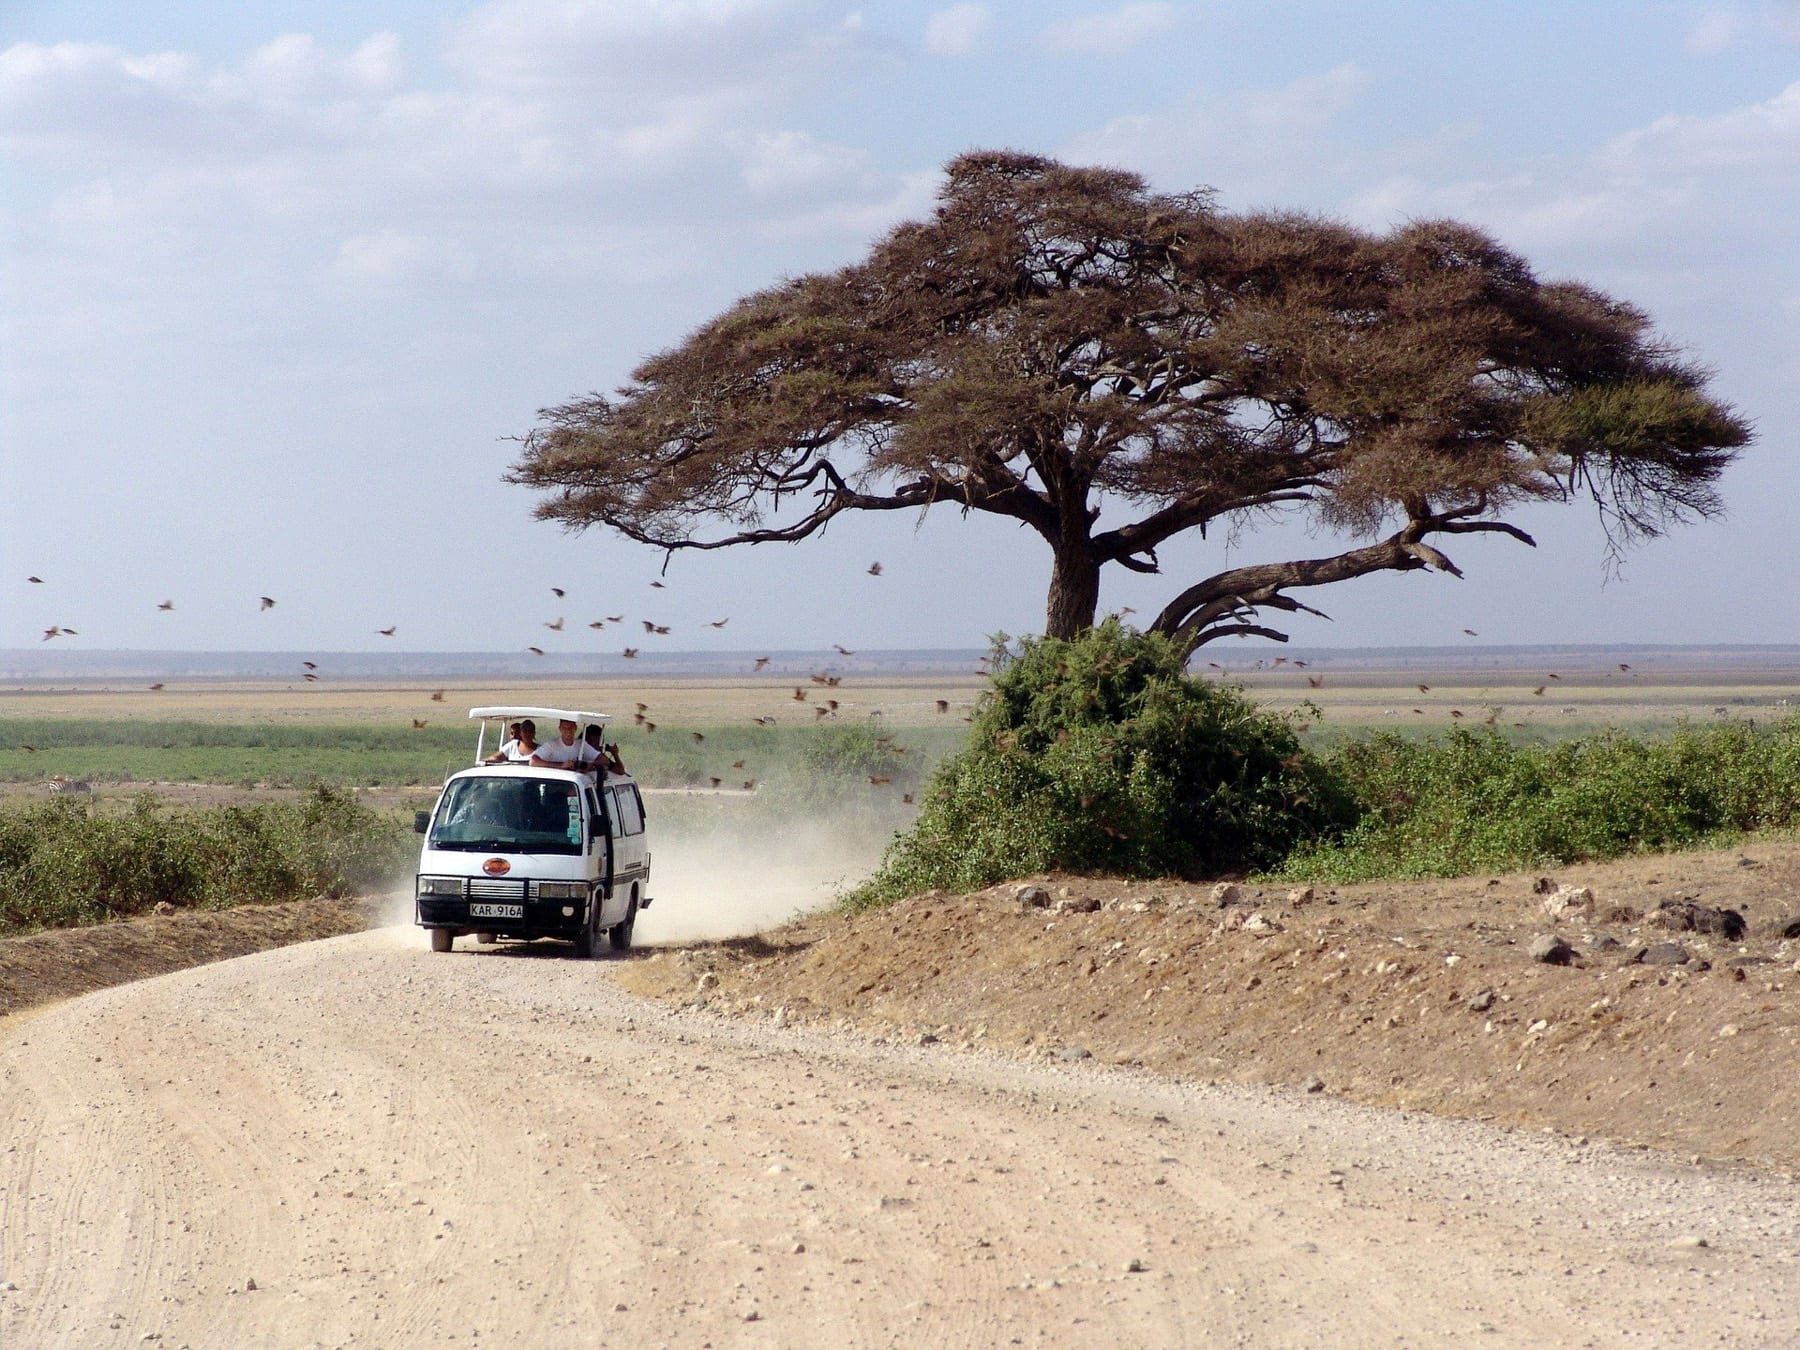 Kenya is proud to be the home of safari and has been recognised as the leading safari destination since 2015. Image by Peggy und Marco Lachmann-Anke, Pixabay.com.